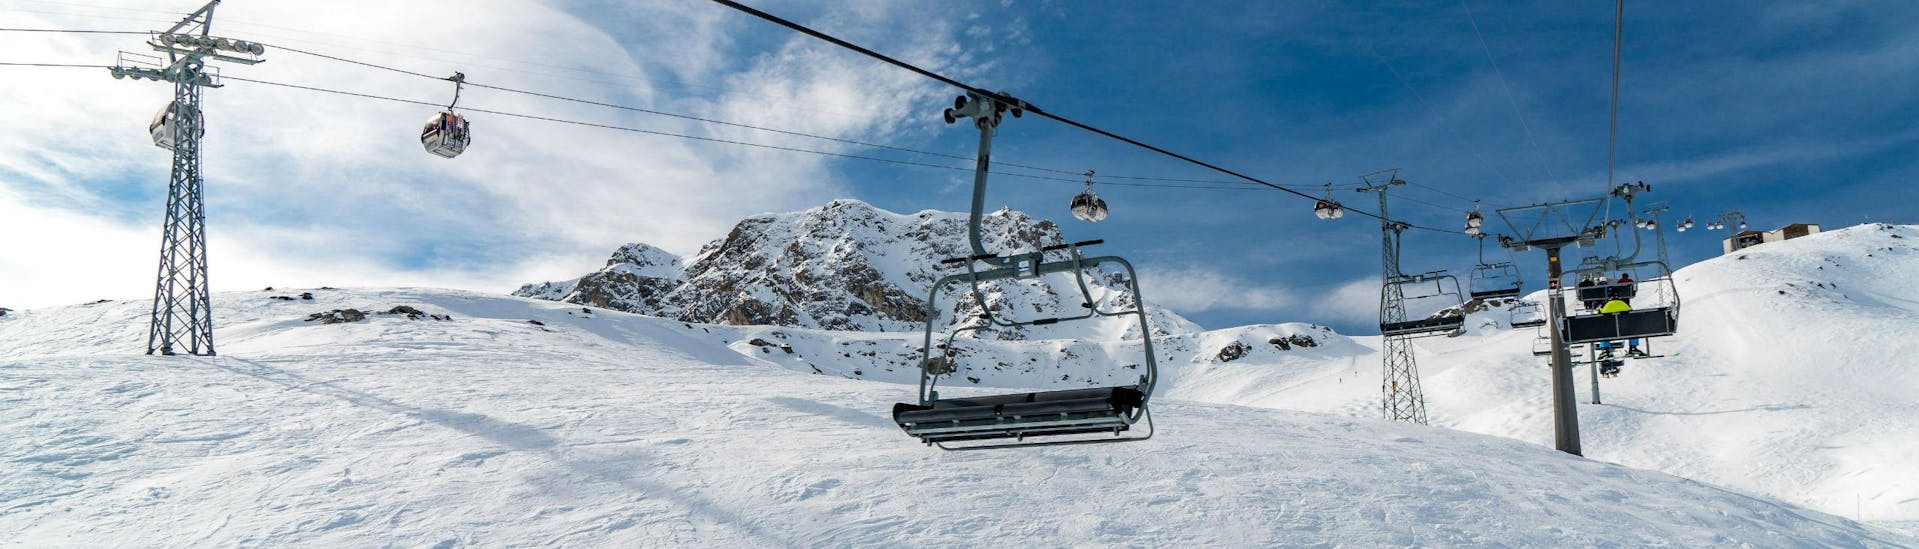 An image of a chair lift and a gondola in the Swiss ski resort of Arosa, where local ski schools offer ski lessons for all those who want to learn to ski.